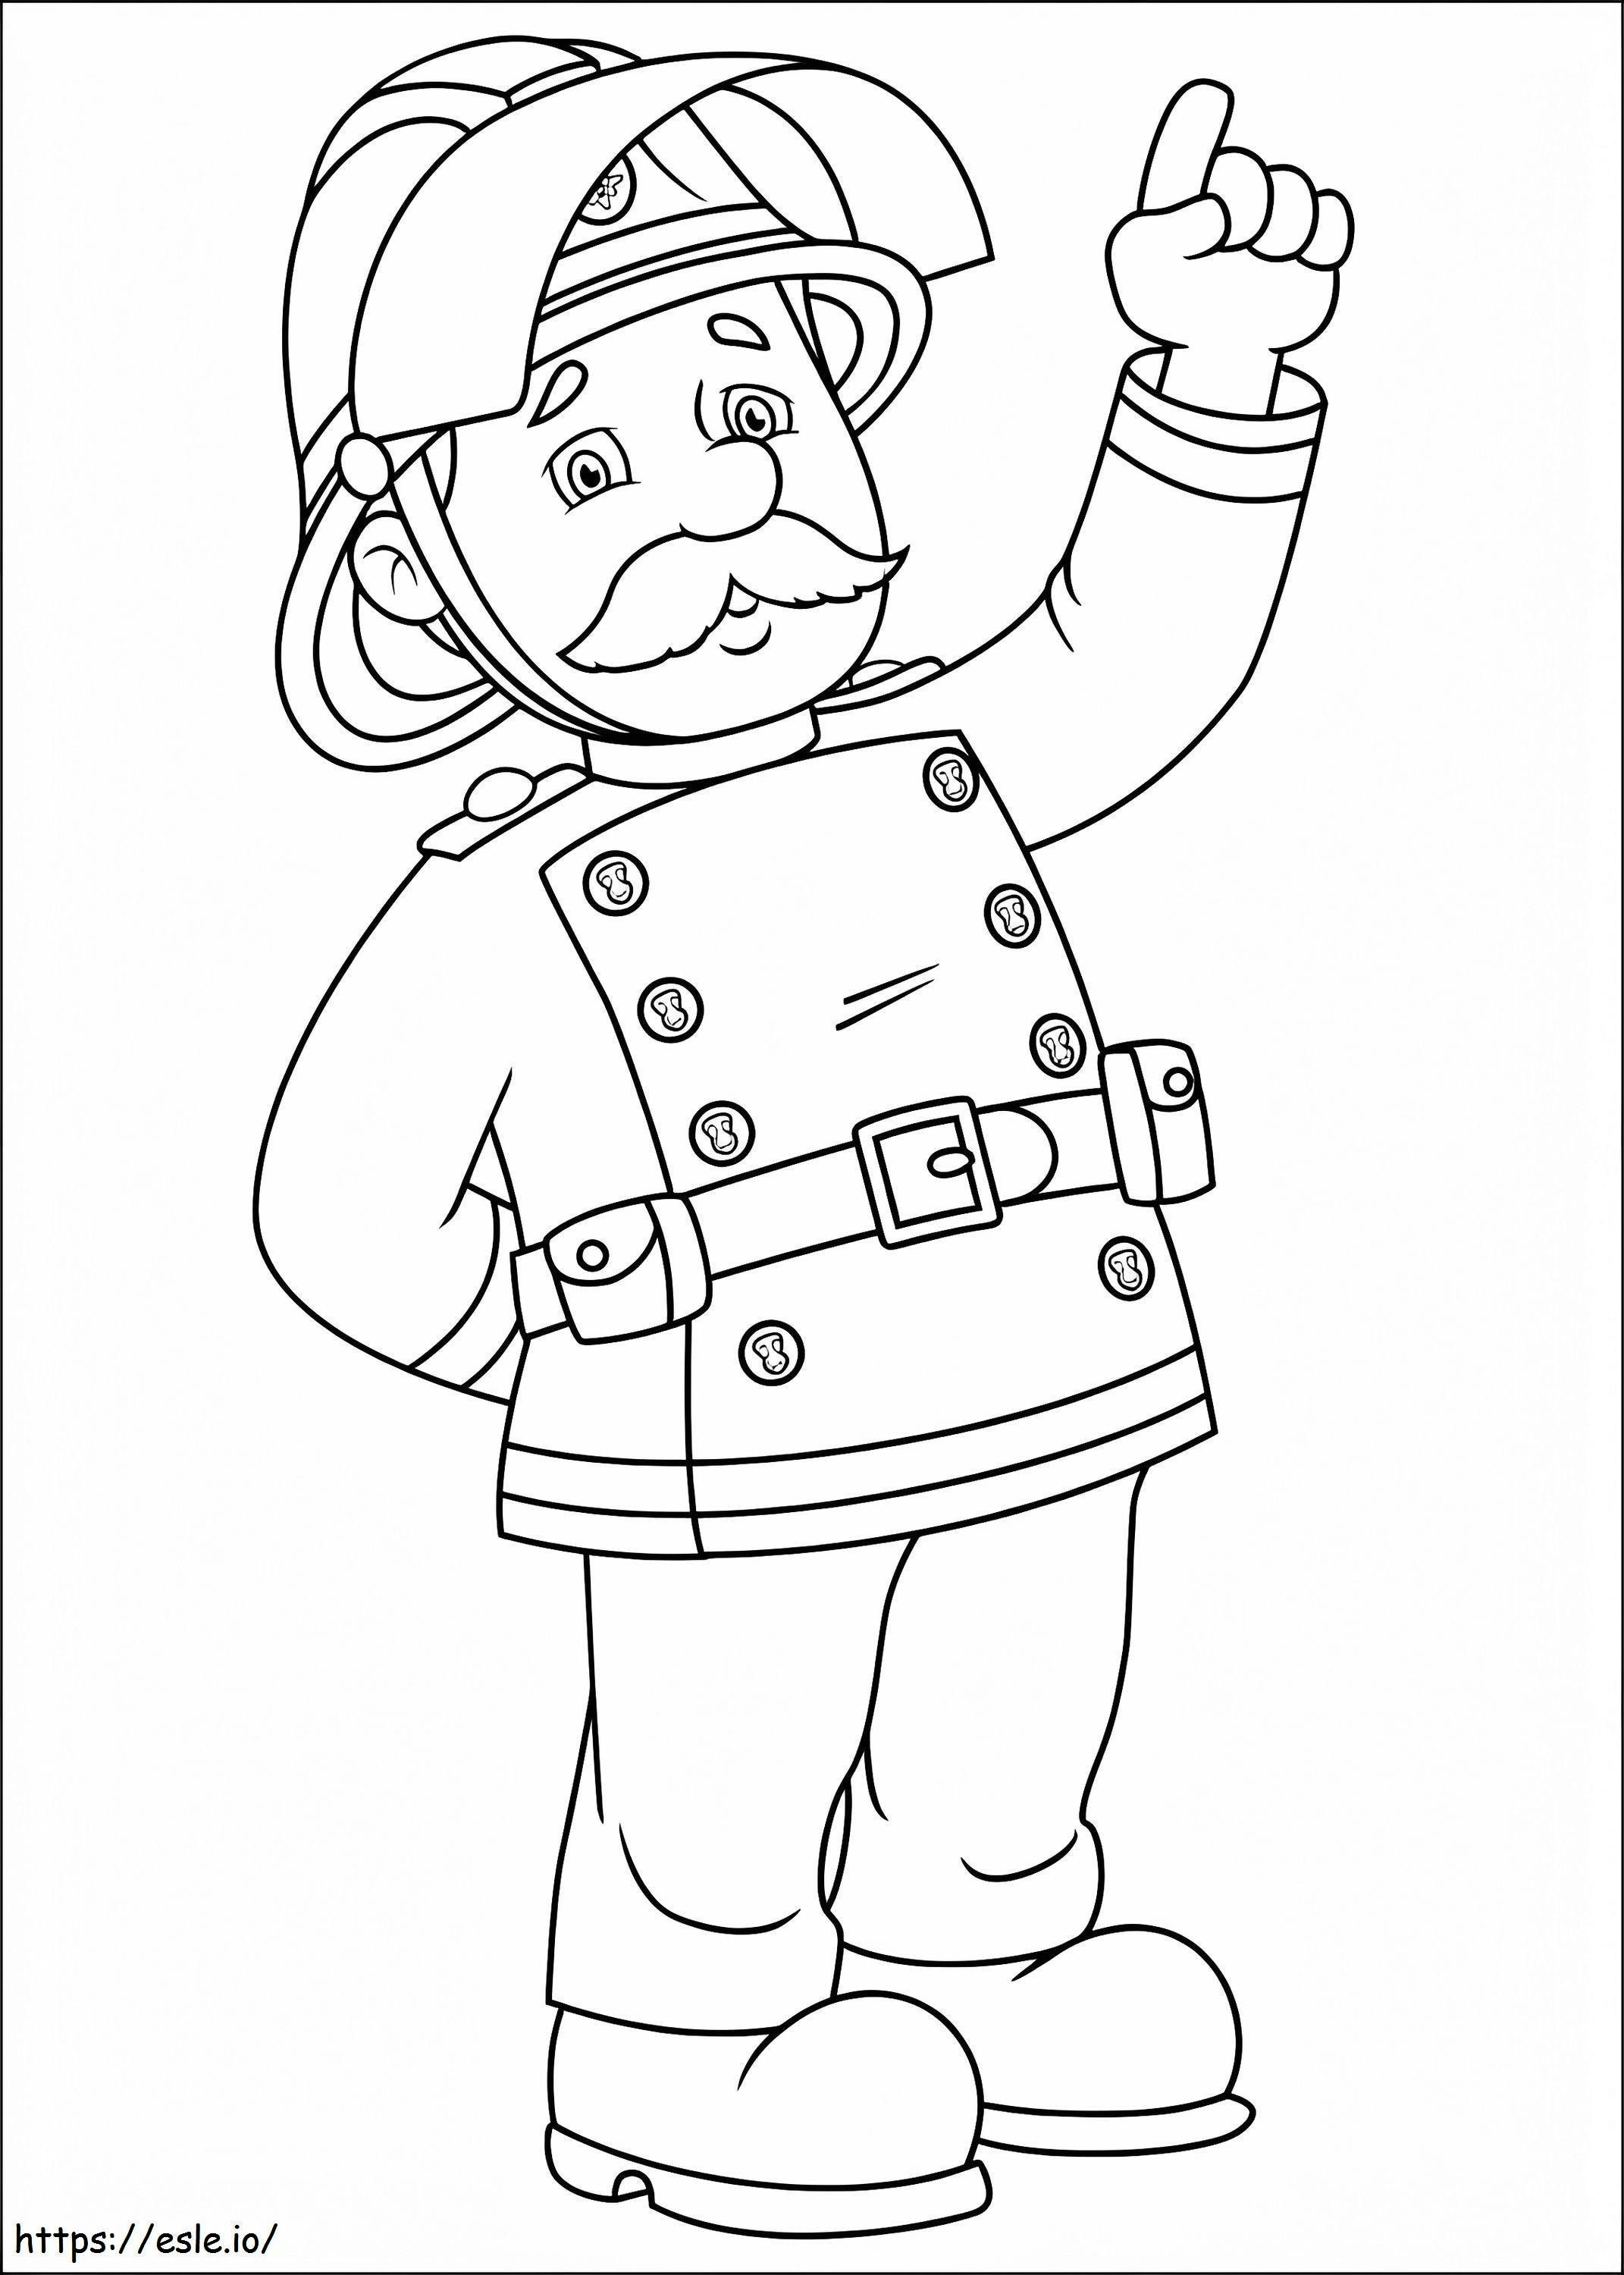 Station Officer Steele coloring page